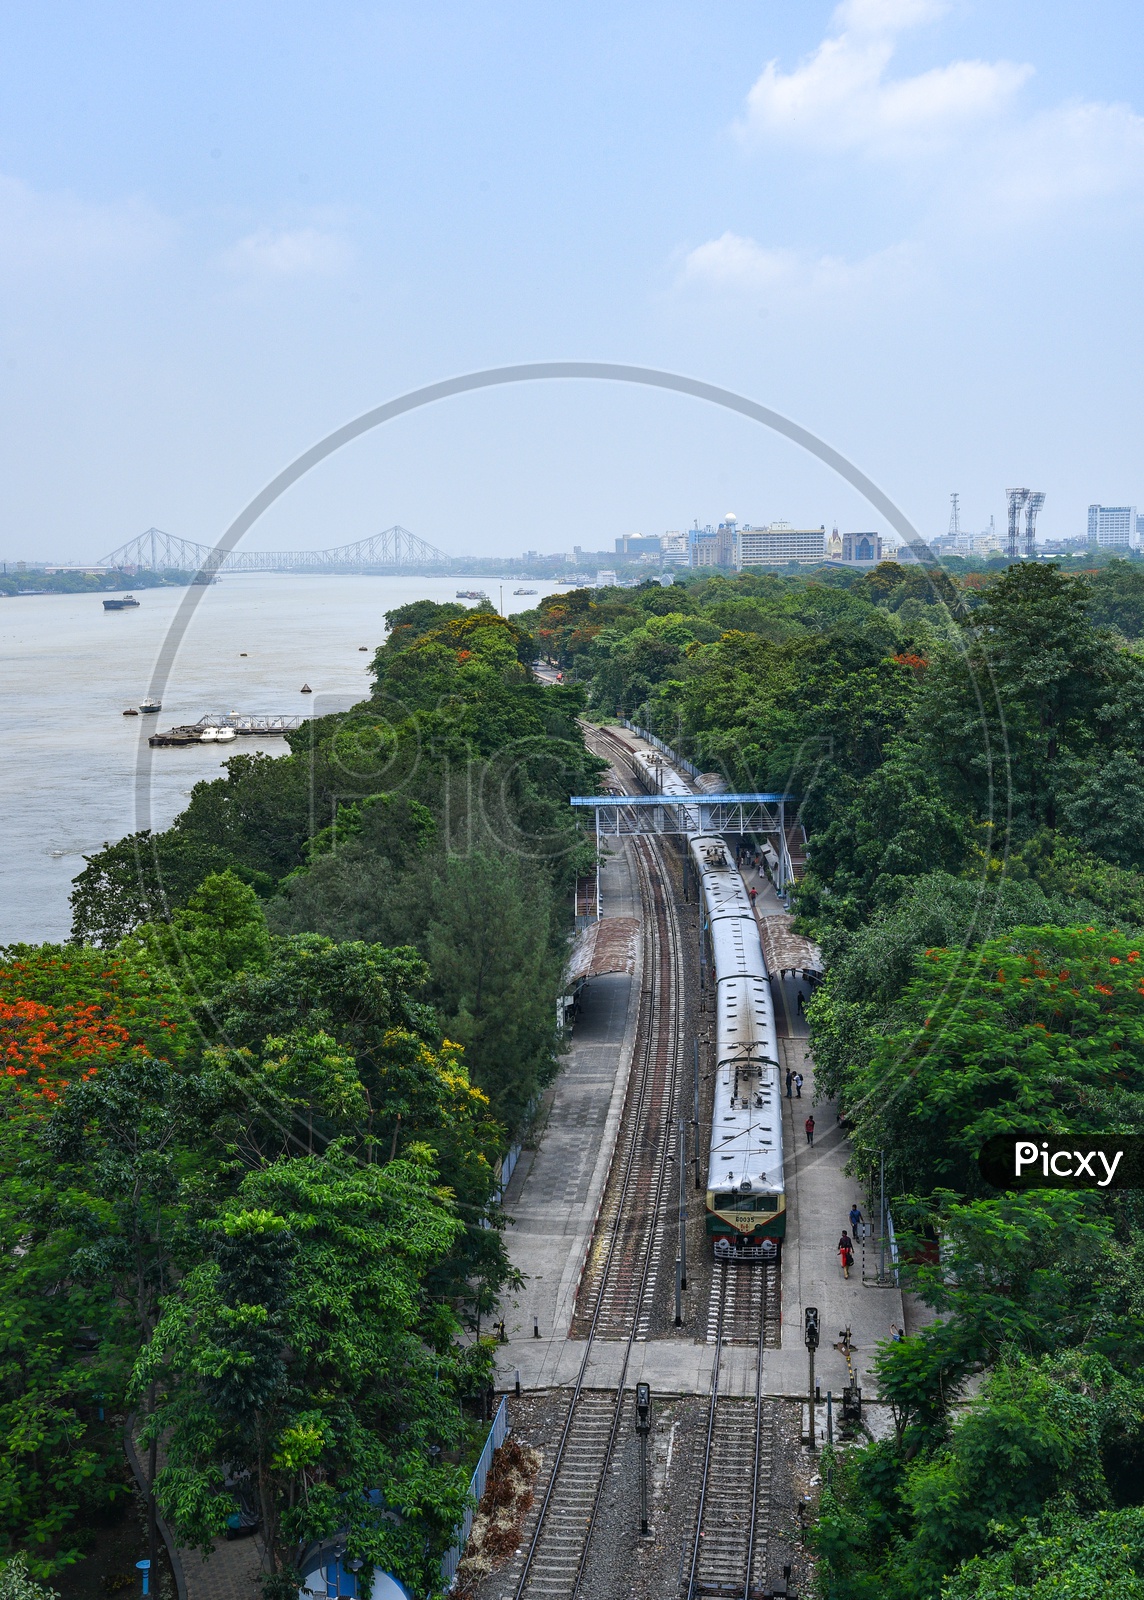 Aerial View Of Kolkata Local Train Station  At princep Ghat besides hooghly River